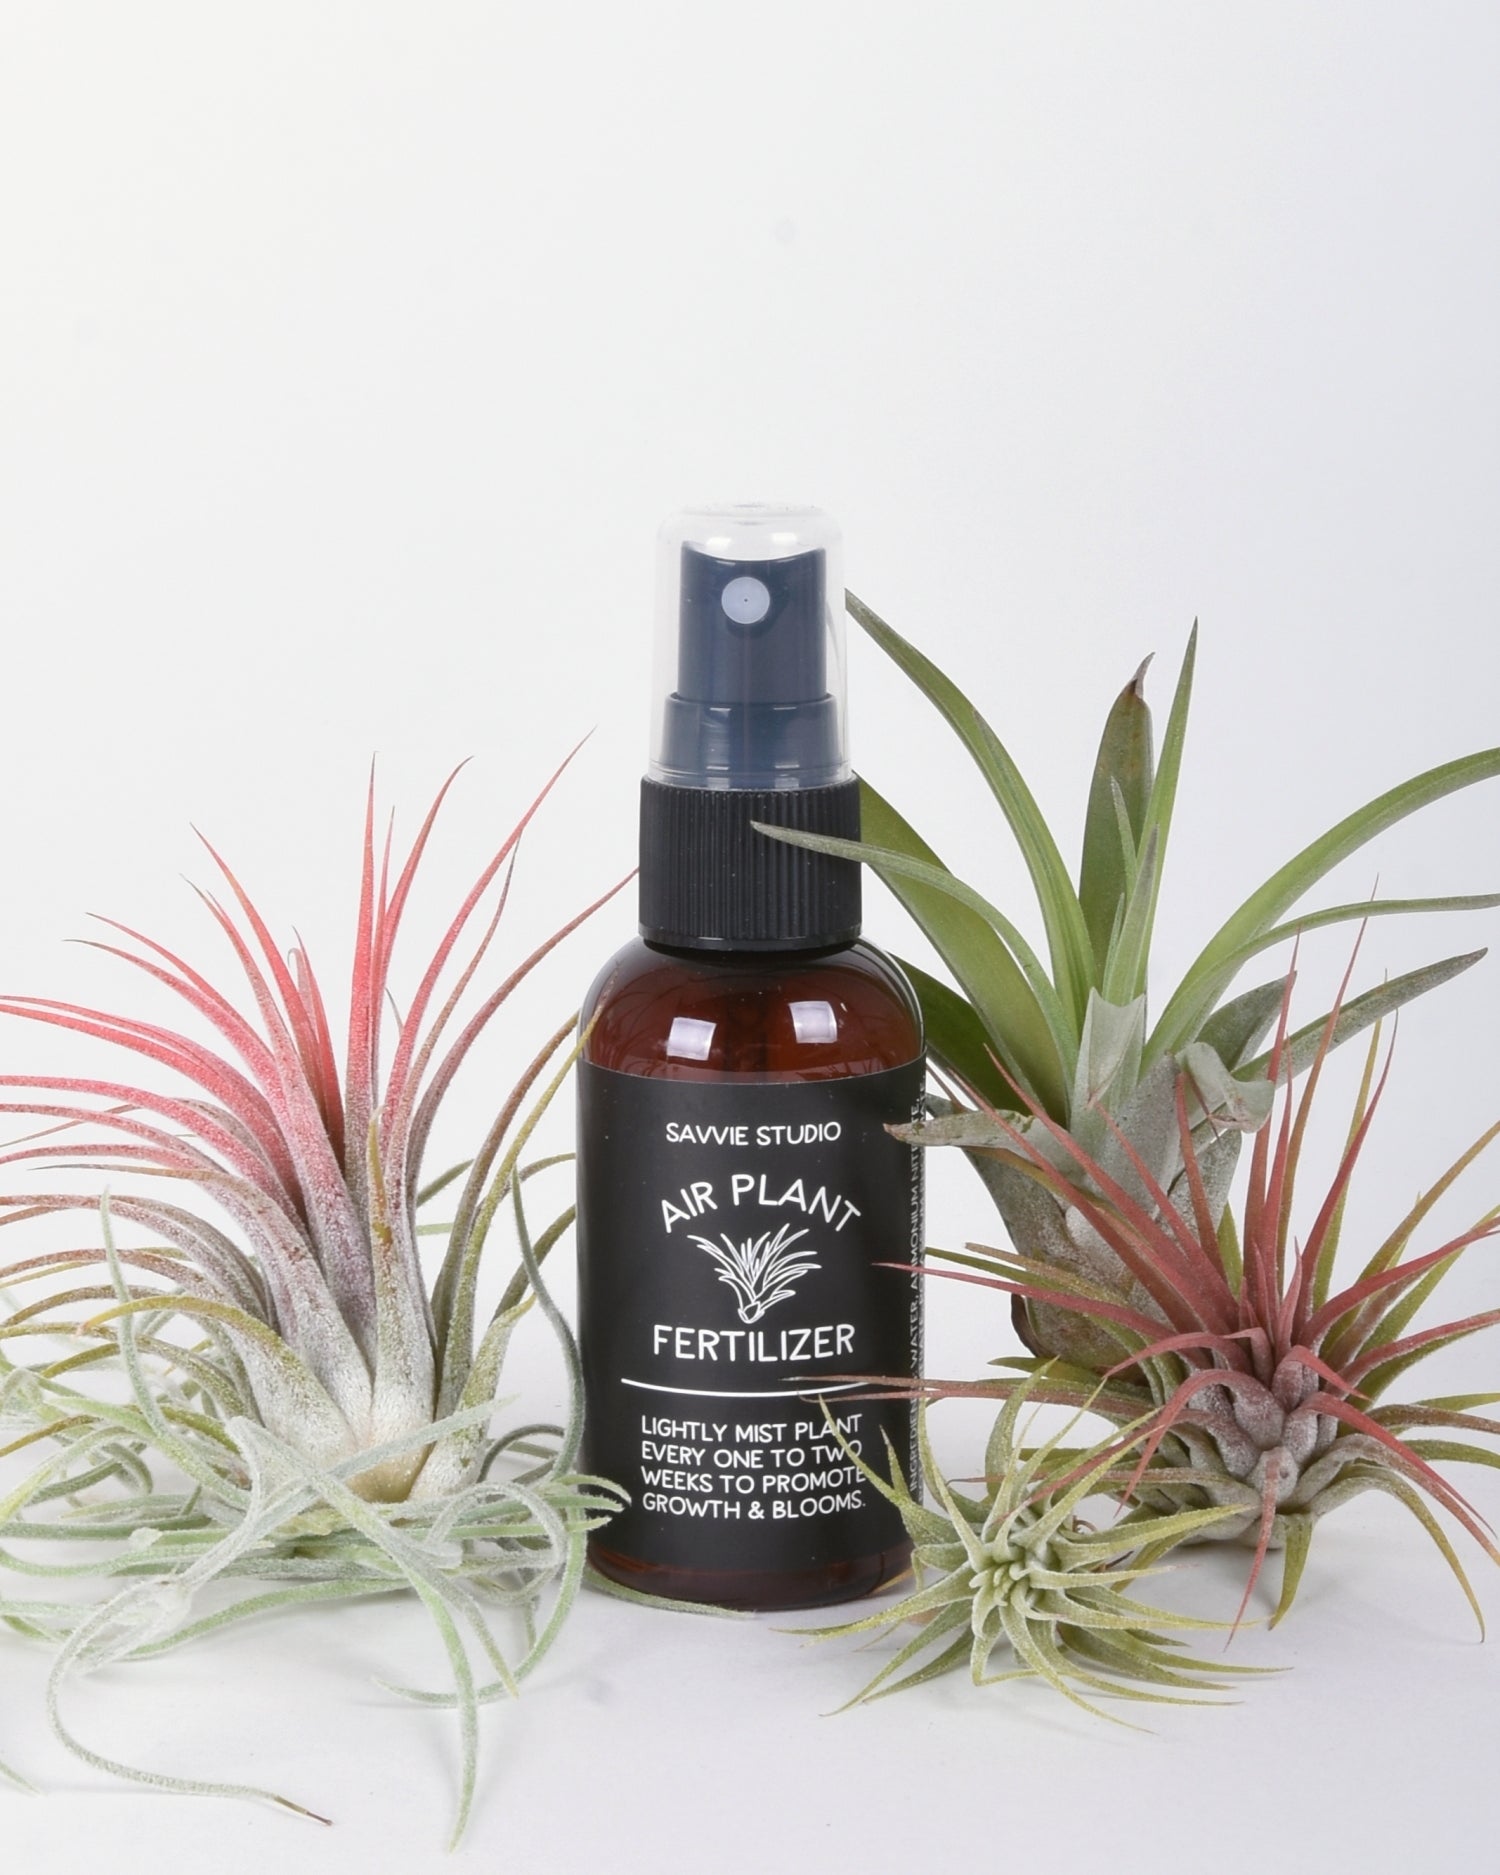 Spray bottle with black and white label surrounded by colorful air plants on a white background